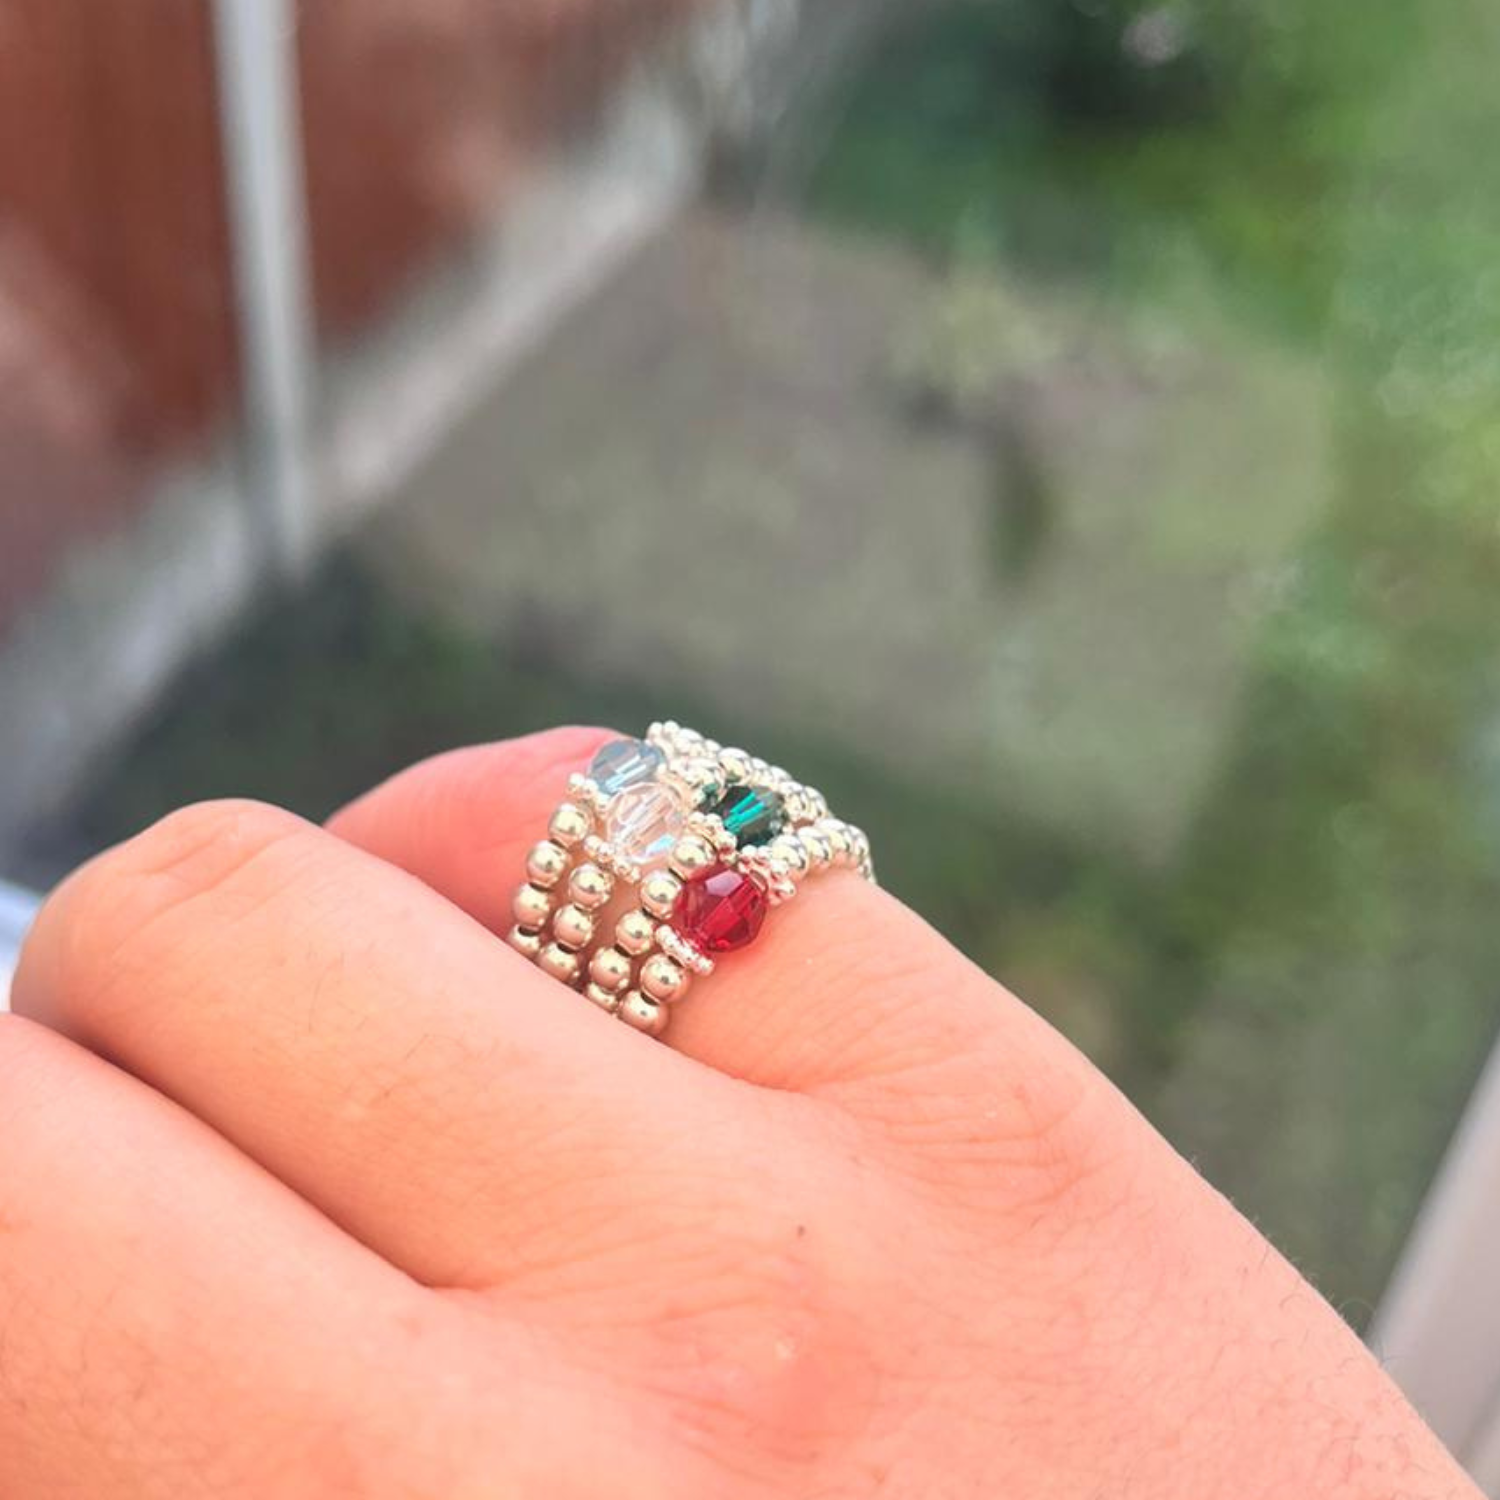 A close-up of a person's hand wearing a beaded ring adorned with various colored beads, including clear, green, and red. The background is slightly blurred, showing a window with a hint of greenery outside.